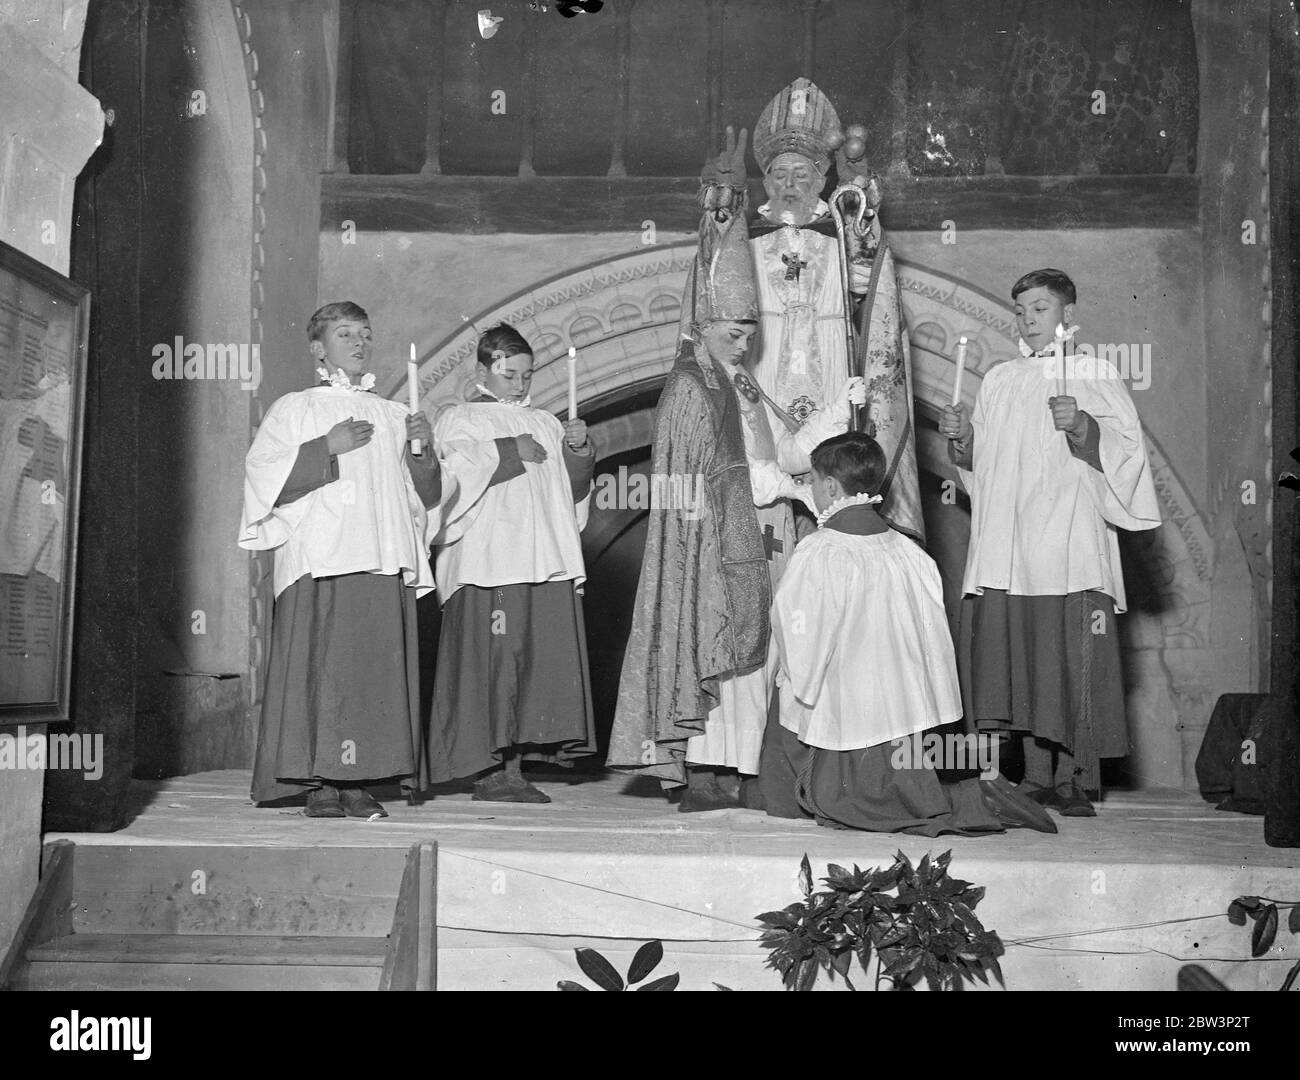 Boy Bishop enthroned in the first public ceremony since the reformation at Guilford . Fred Brazier , aged 12 chosen as ' Boy Bishop ' of St Mary of the Angels song school , Highgate , was enthroned by the Rev Desmond Morse Boycott as St Nicholas , at Compton church , Guilford , Surrey , in the first public ceremony since the reformation . Photo shows , the Chaplain kissing the boy bishop as St Nicholas blessed them during the ceremony . 6 December 1935 Stock Photo